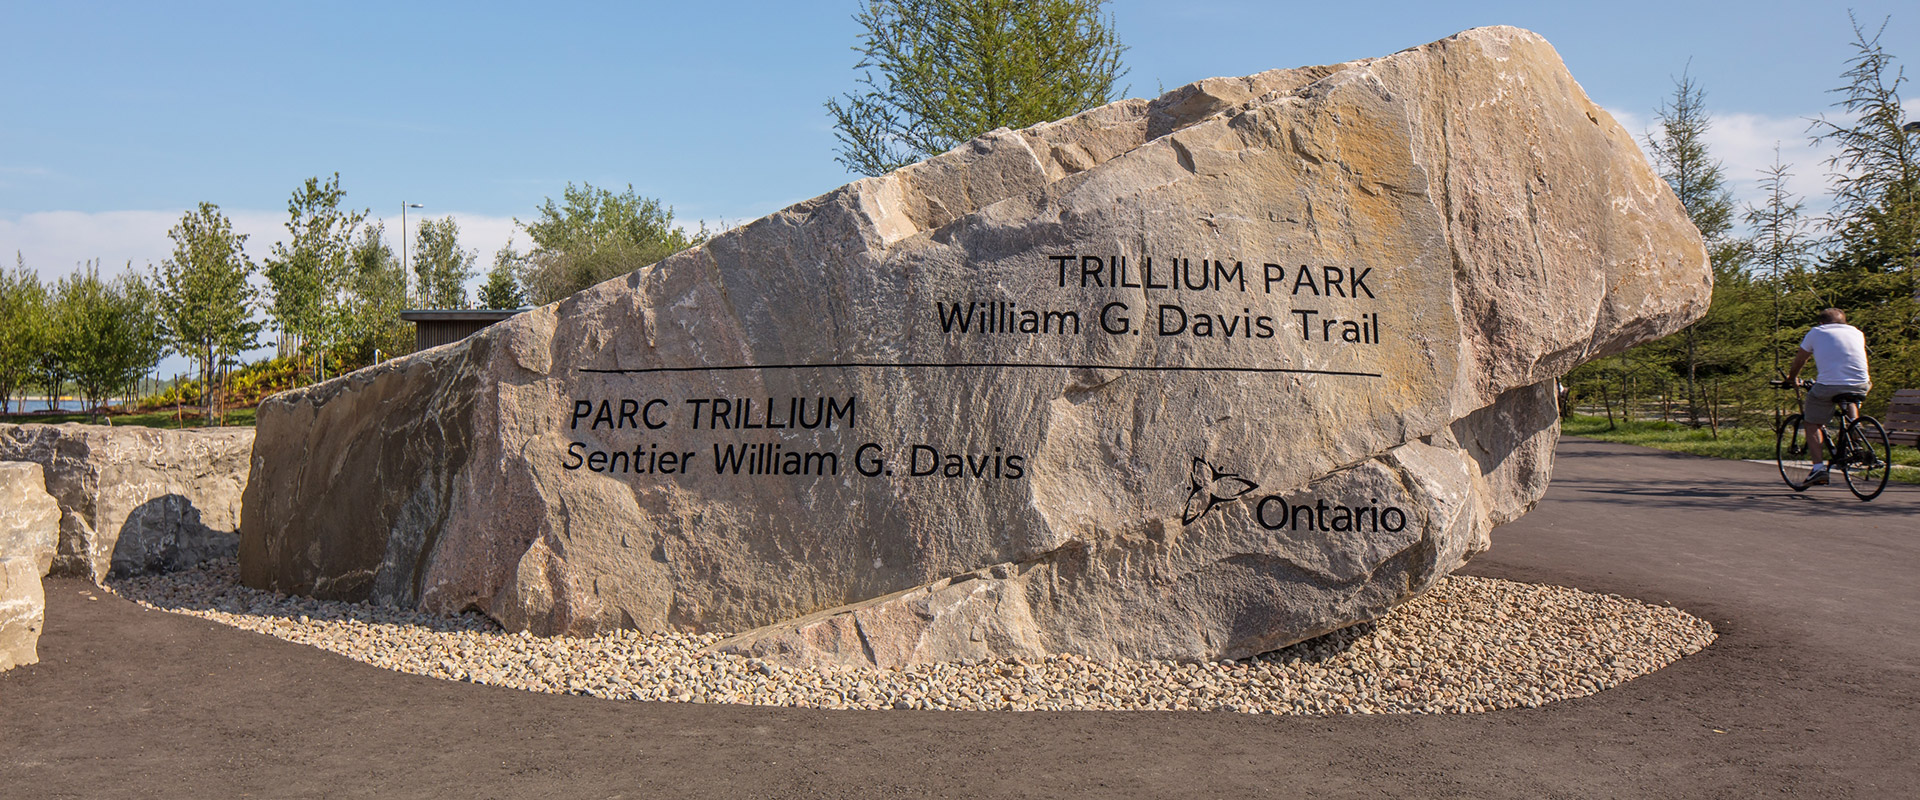 Large granite slab inscribed with 'Trillium Park' situated in an open area of the park